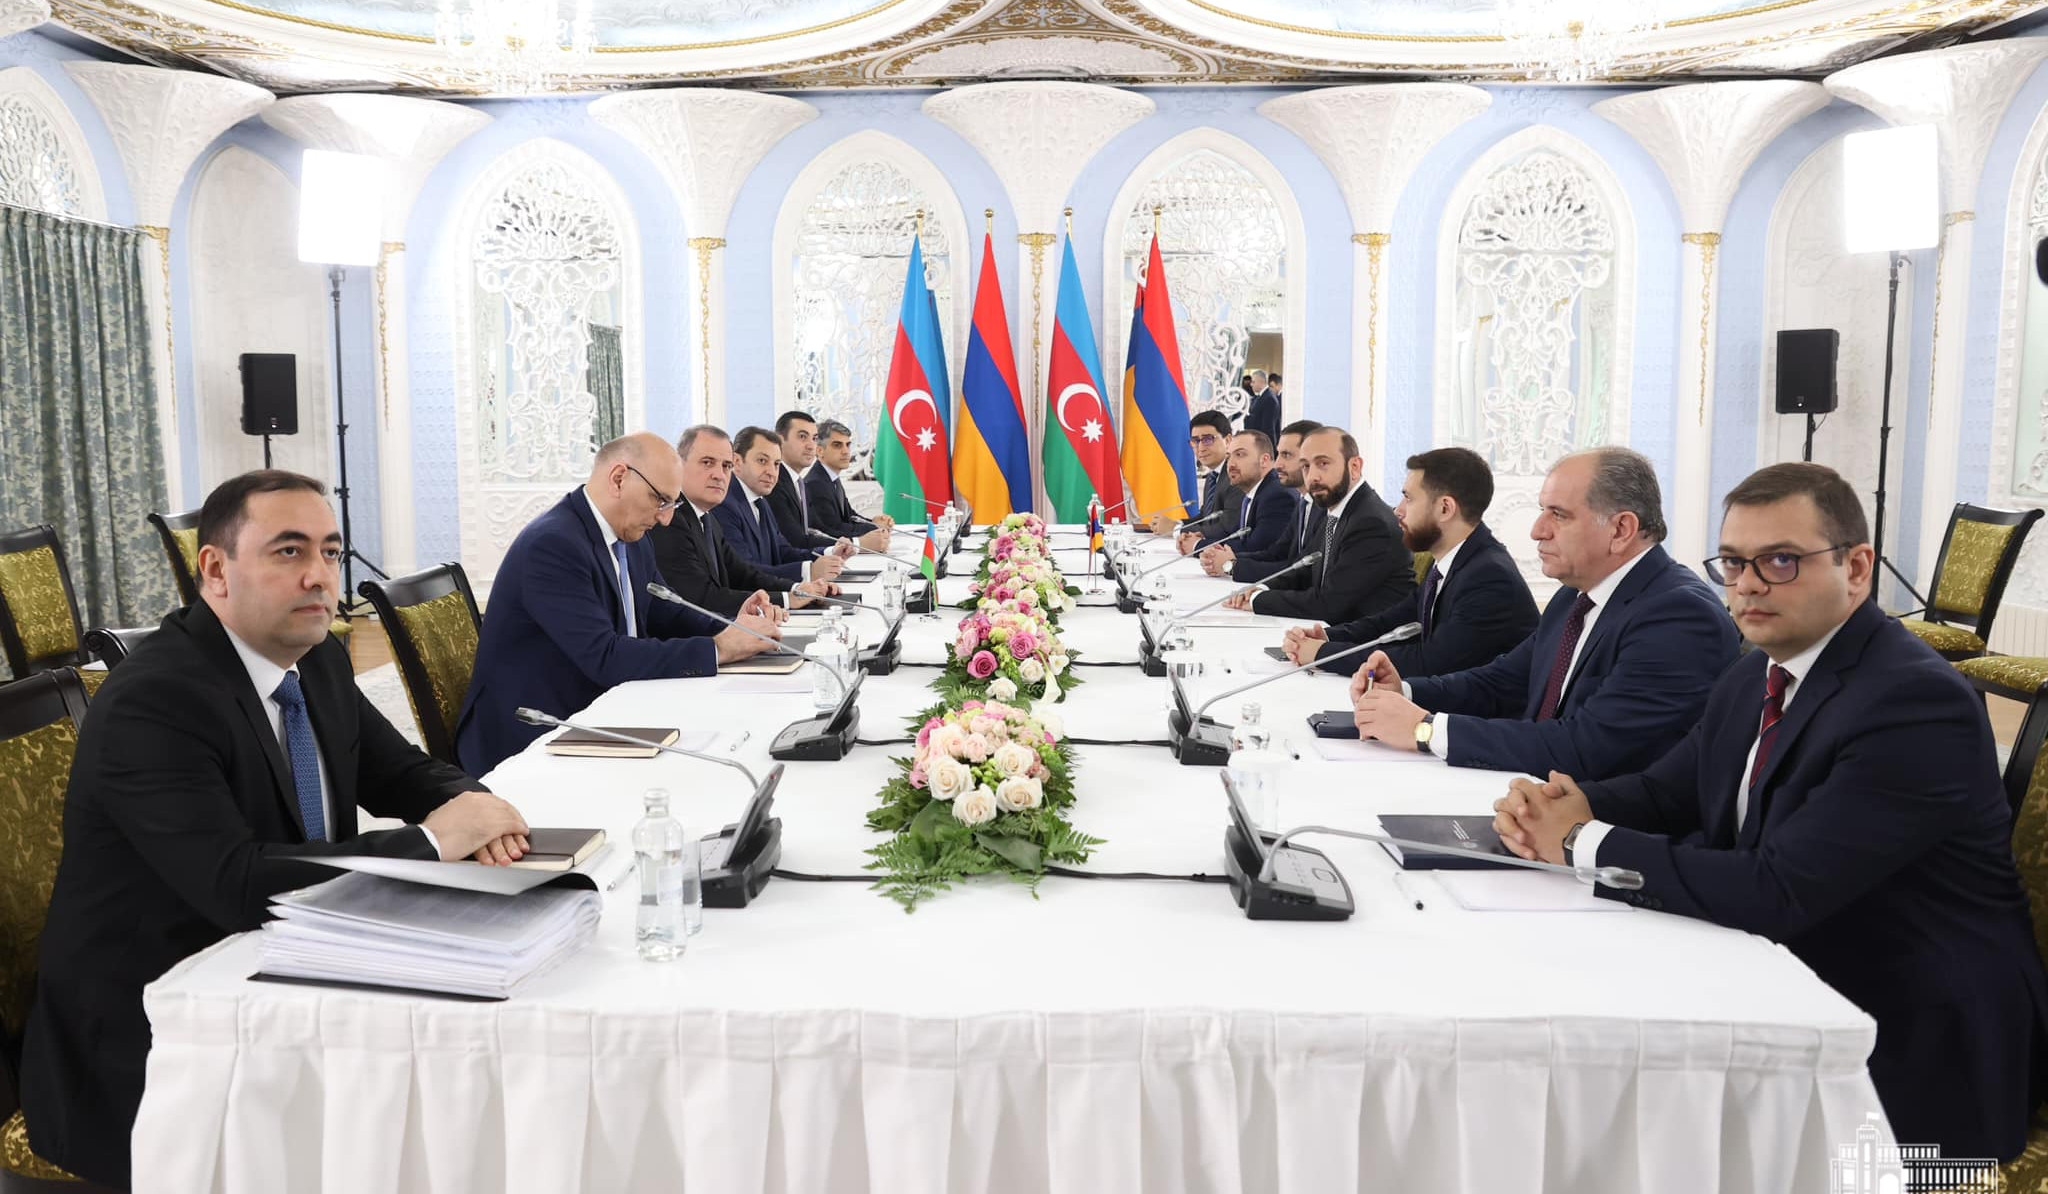 Meeting of delegations led by Foreign Ministers of Armenia and Azerbaijan started